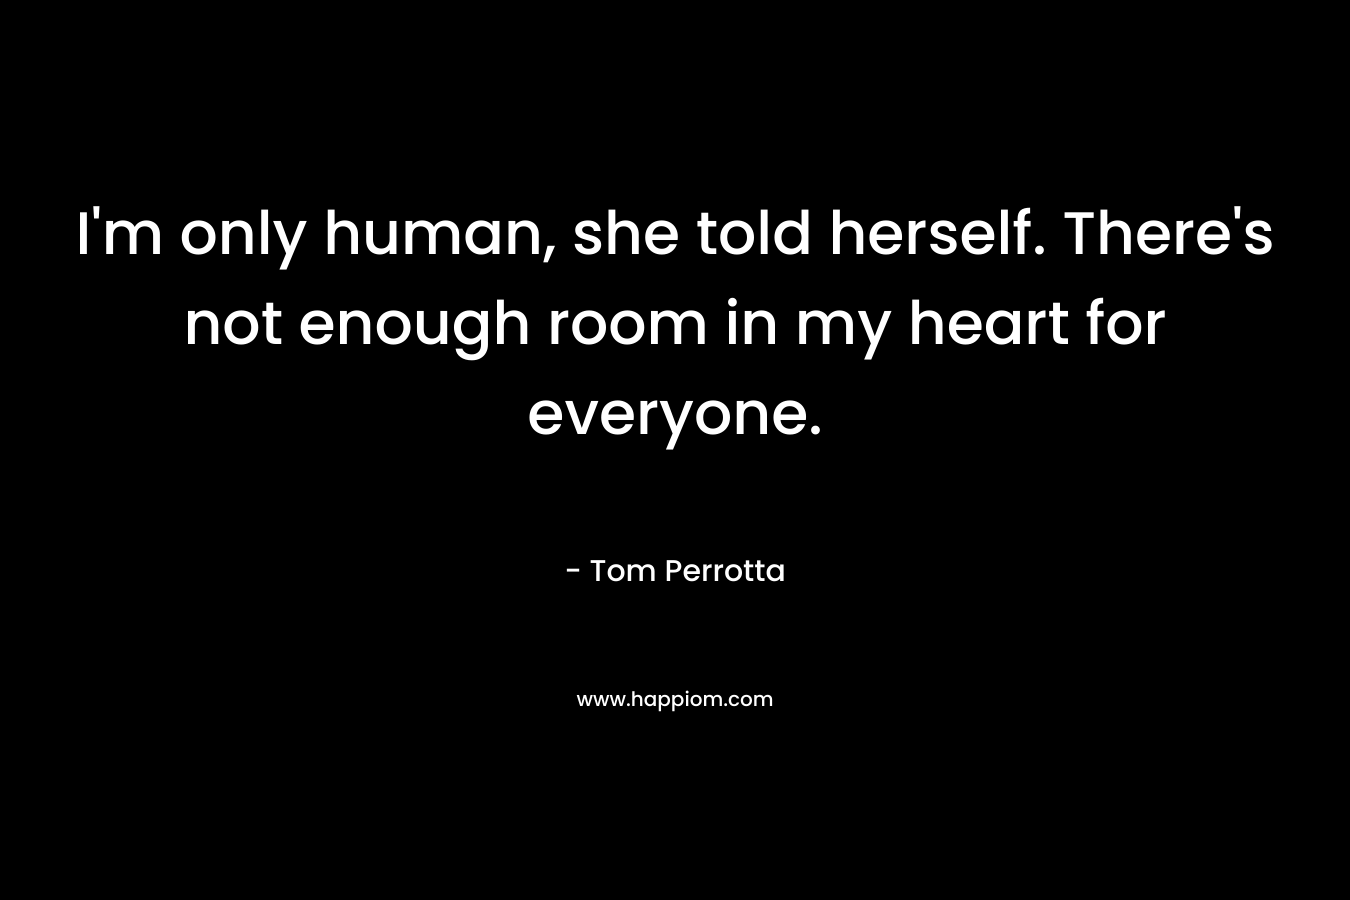 I'm only human, she told herself. There's not enough room in my heart for everyone.